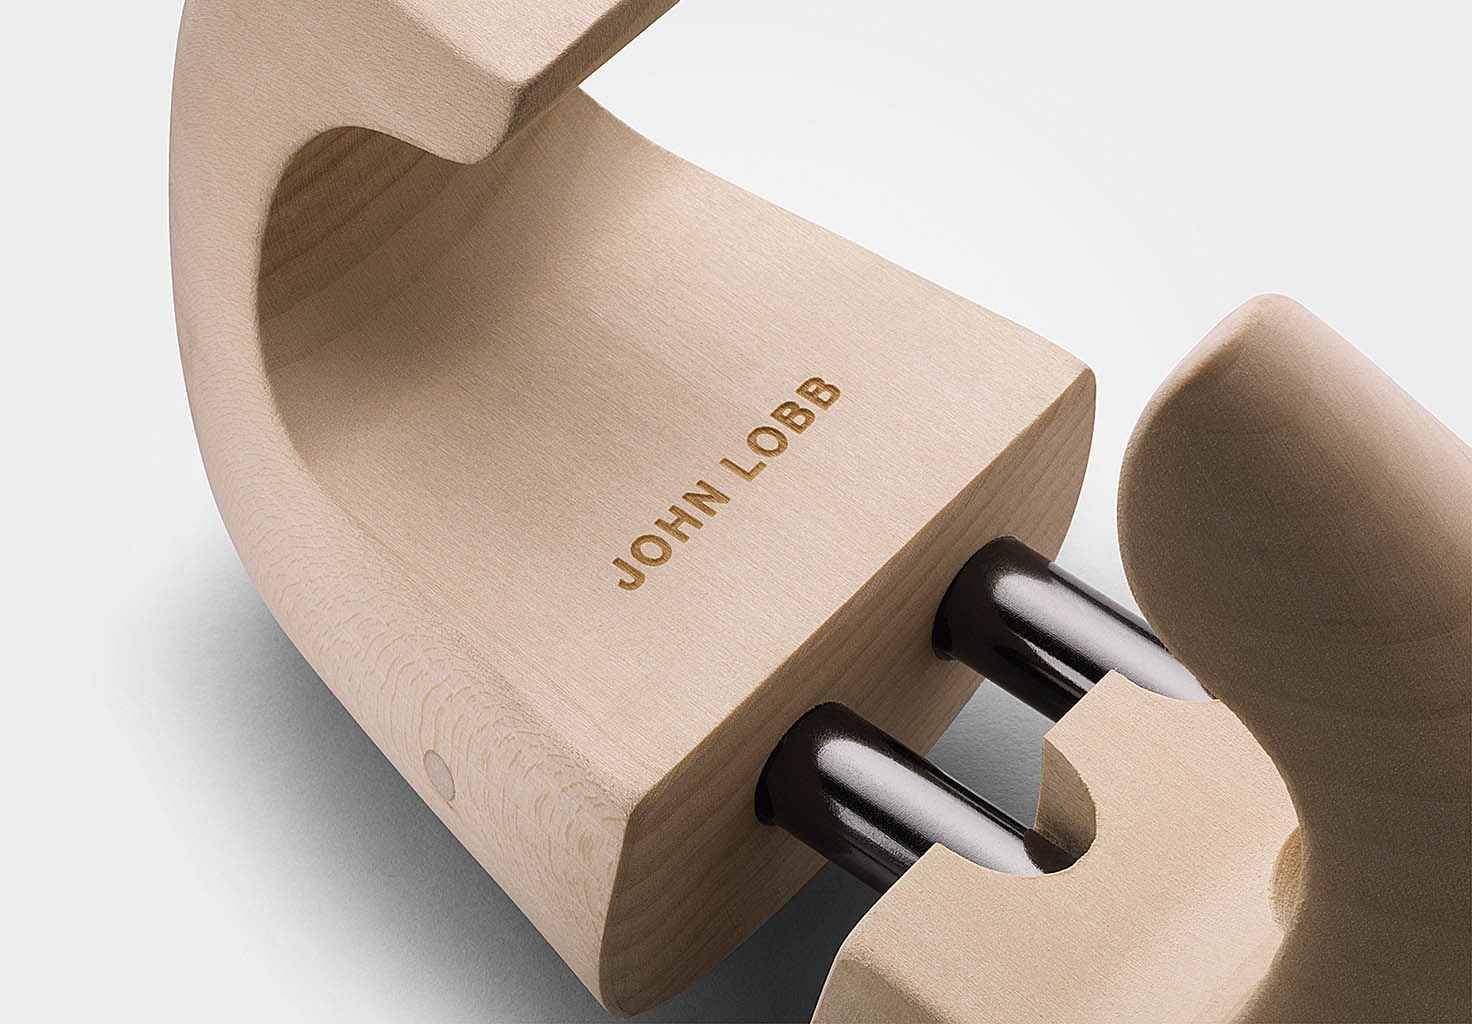 Still Life Product Photography of John Lobb shoe wooden stretcher by Packshot Factory